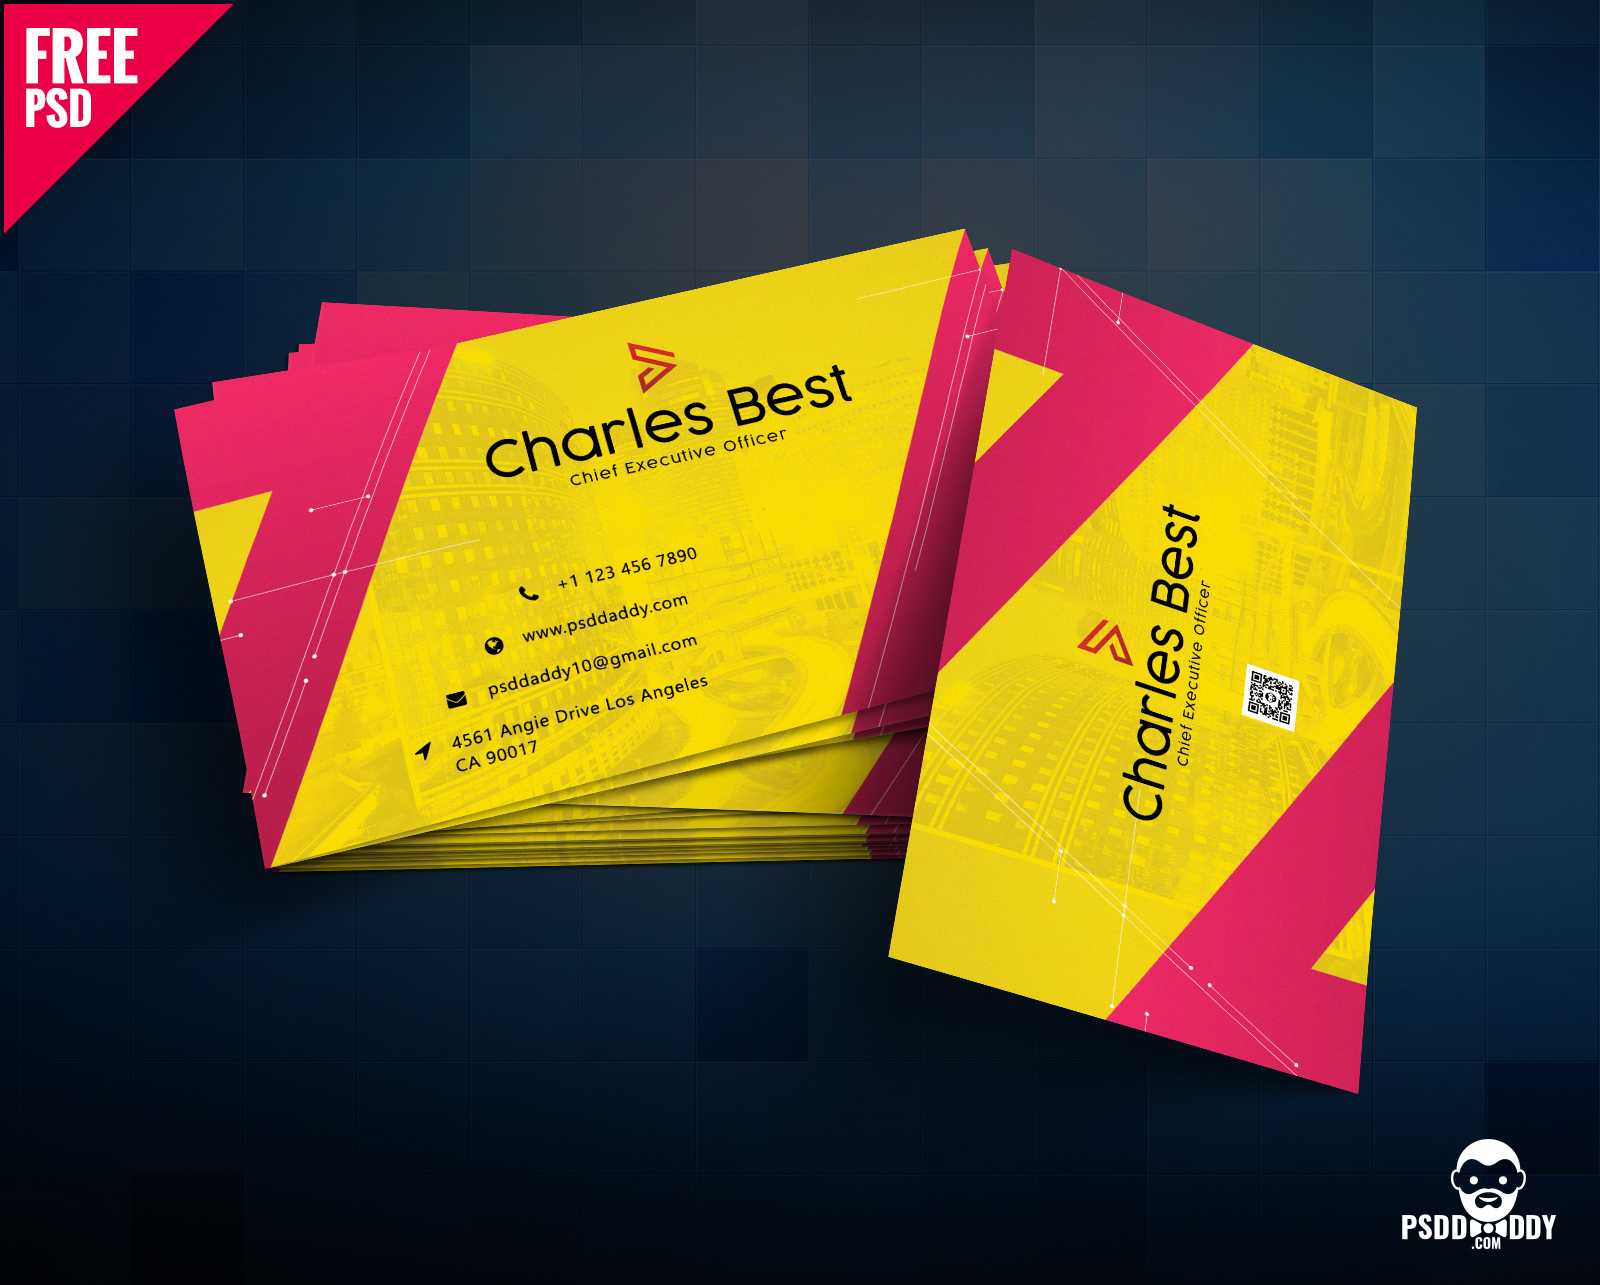 Download] Creative Business Card Free Psd | Psddaddy For Visiting Card Psd Template Free Download